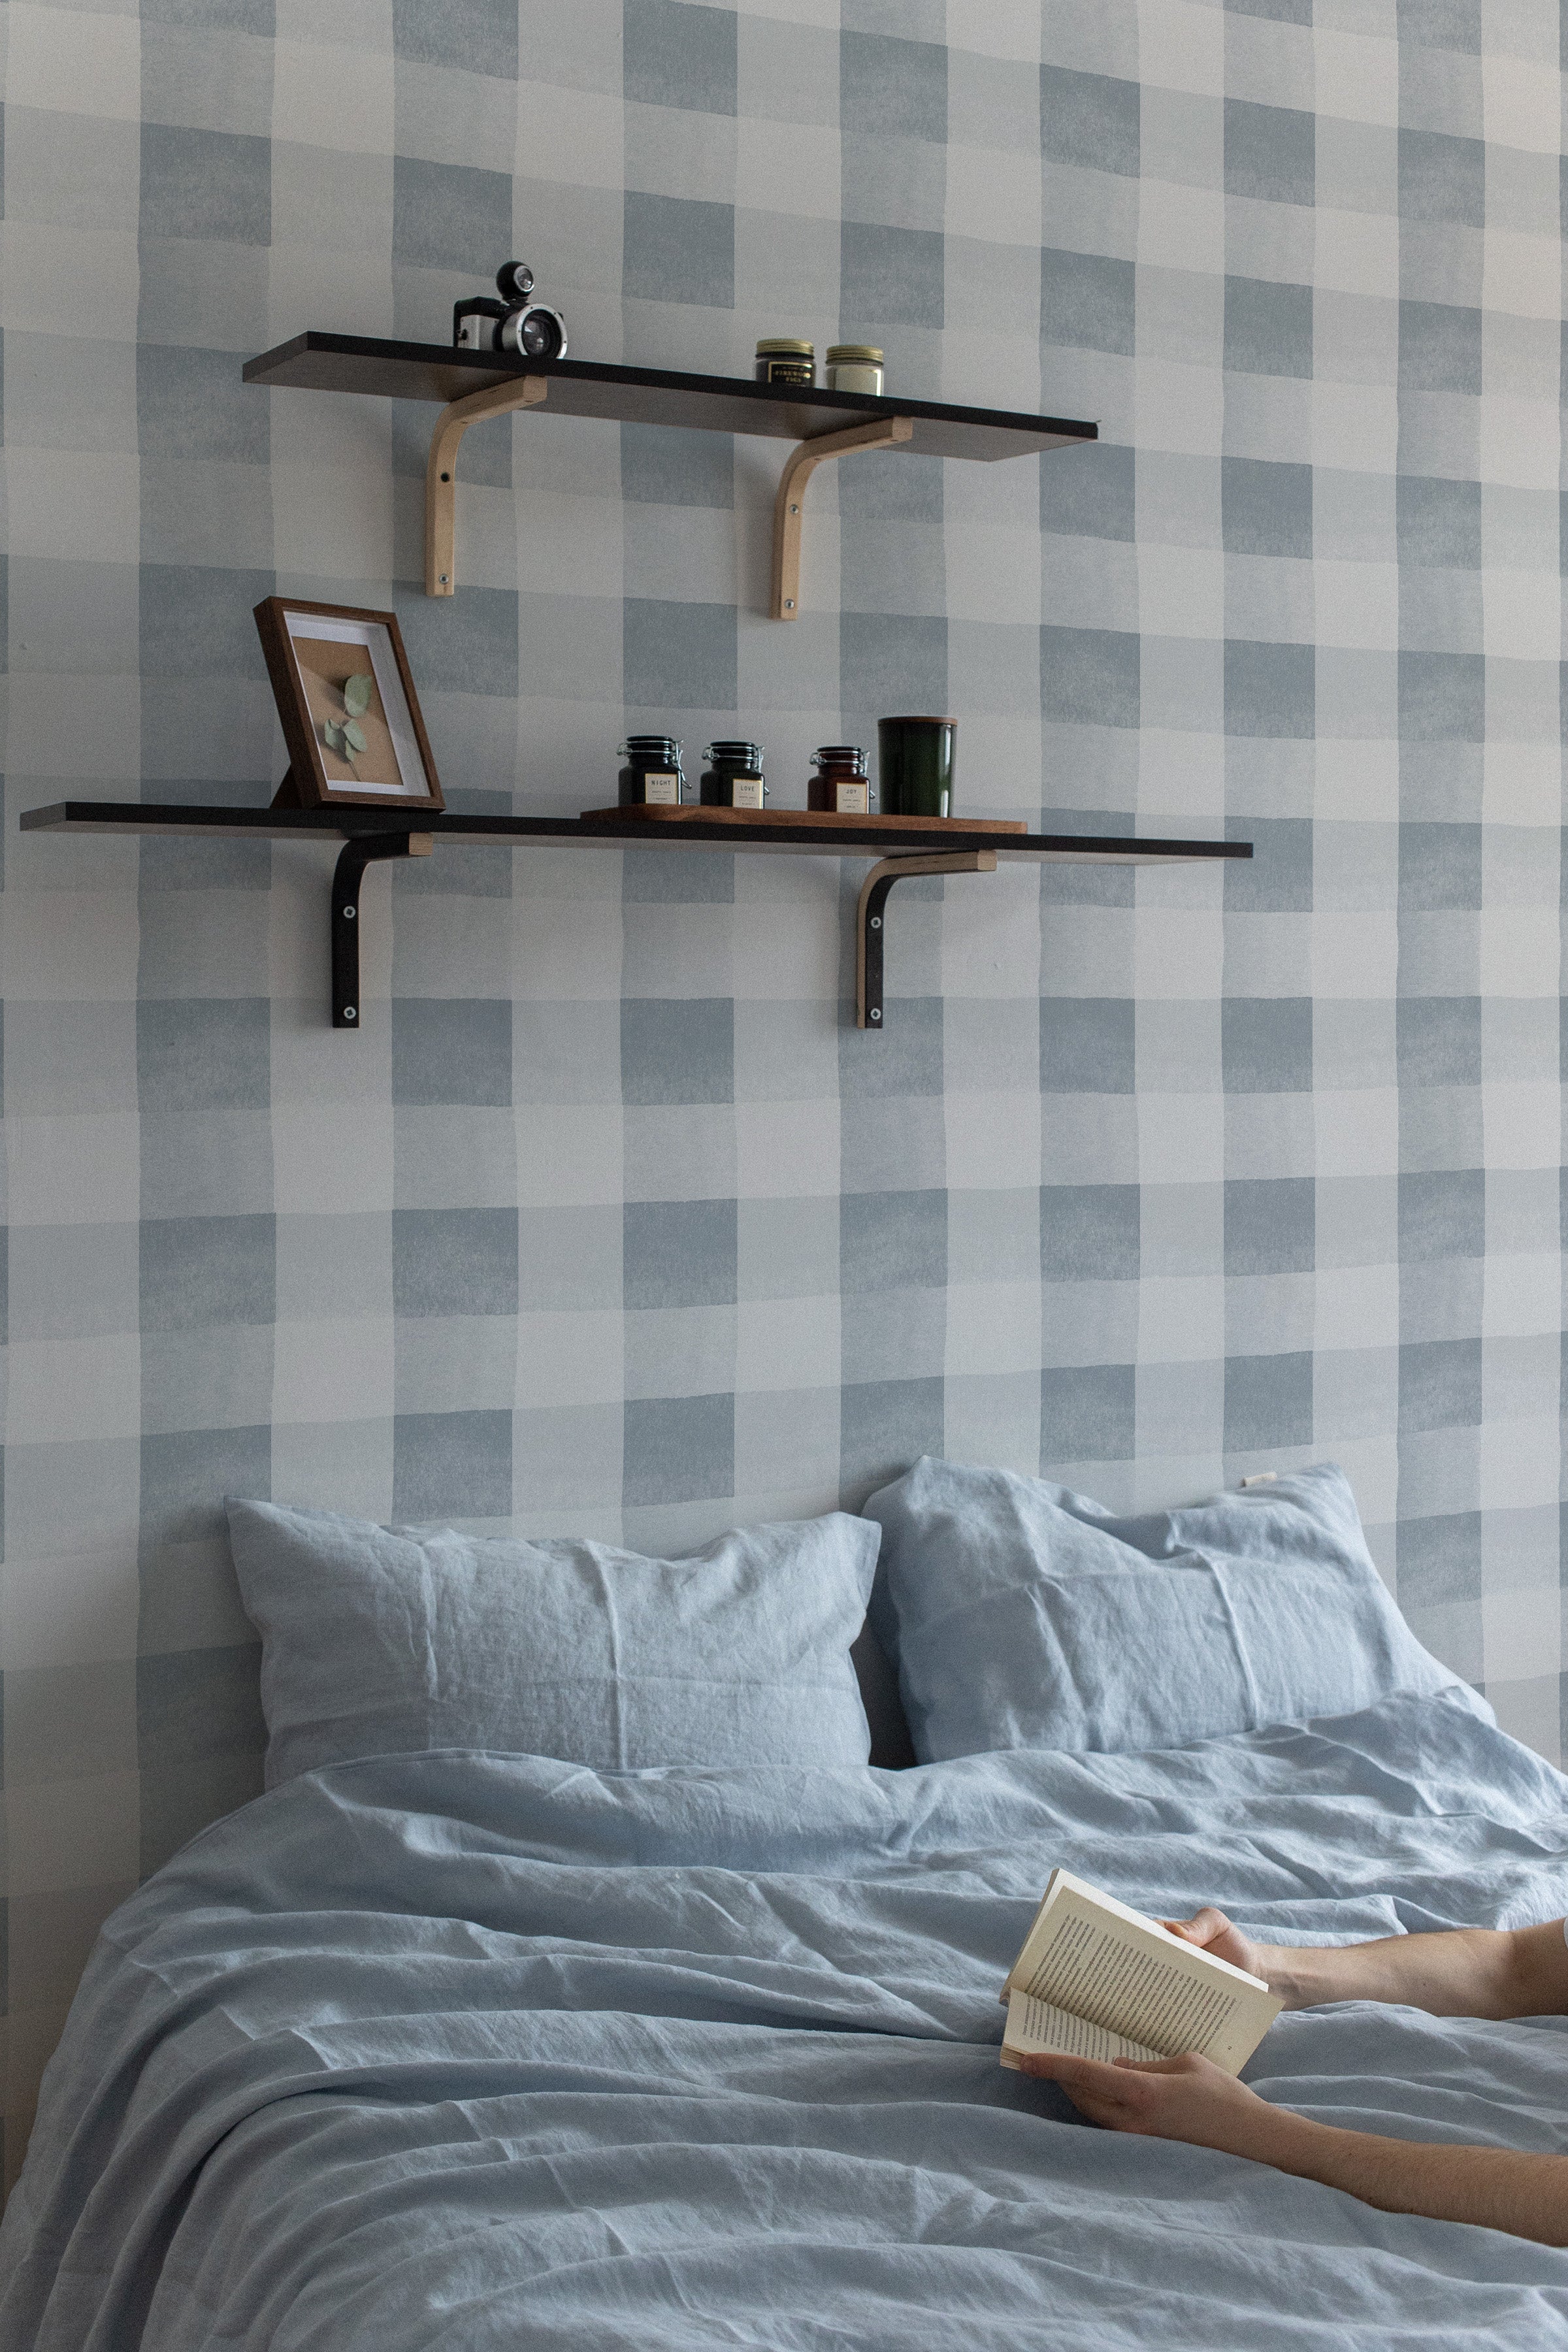  a bedroom interior with "Camille Wallpaper - Pale Blue" adorning the wall behind a cozy bed with blue linens. The gentle pale blue checkered pattern of the wallpaper provides a serene backdrop, enhancing the room's relaxed vibe. Wooden shelves with personal items and plants add warmth to the space, complementing the soft aesthetic of the wallpaper.